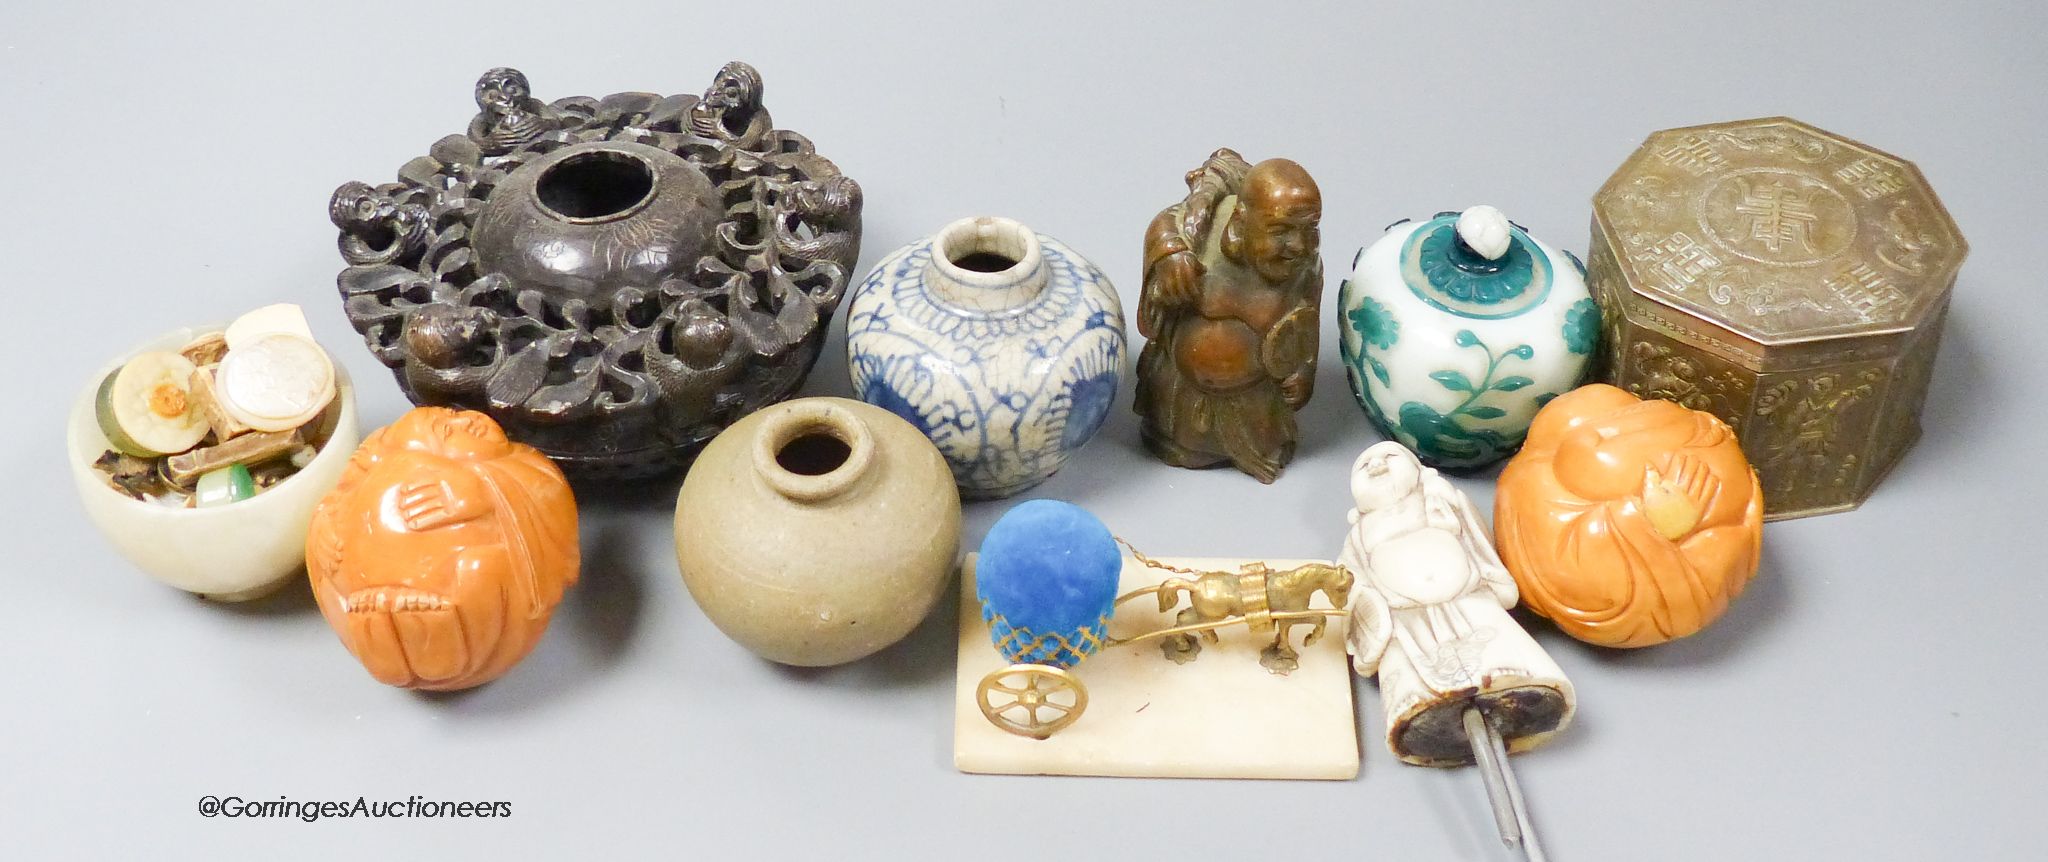 A collection of Chinese decorative pieces including glass, ceramic, metal and mineral